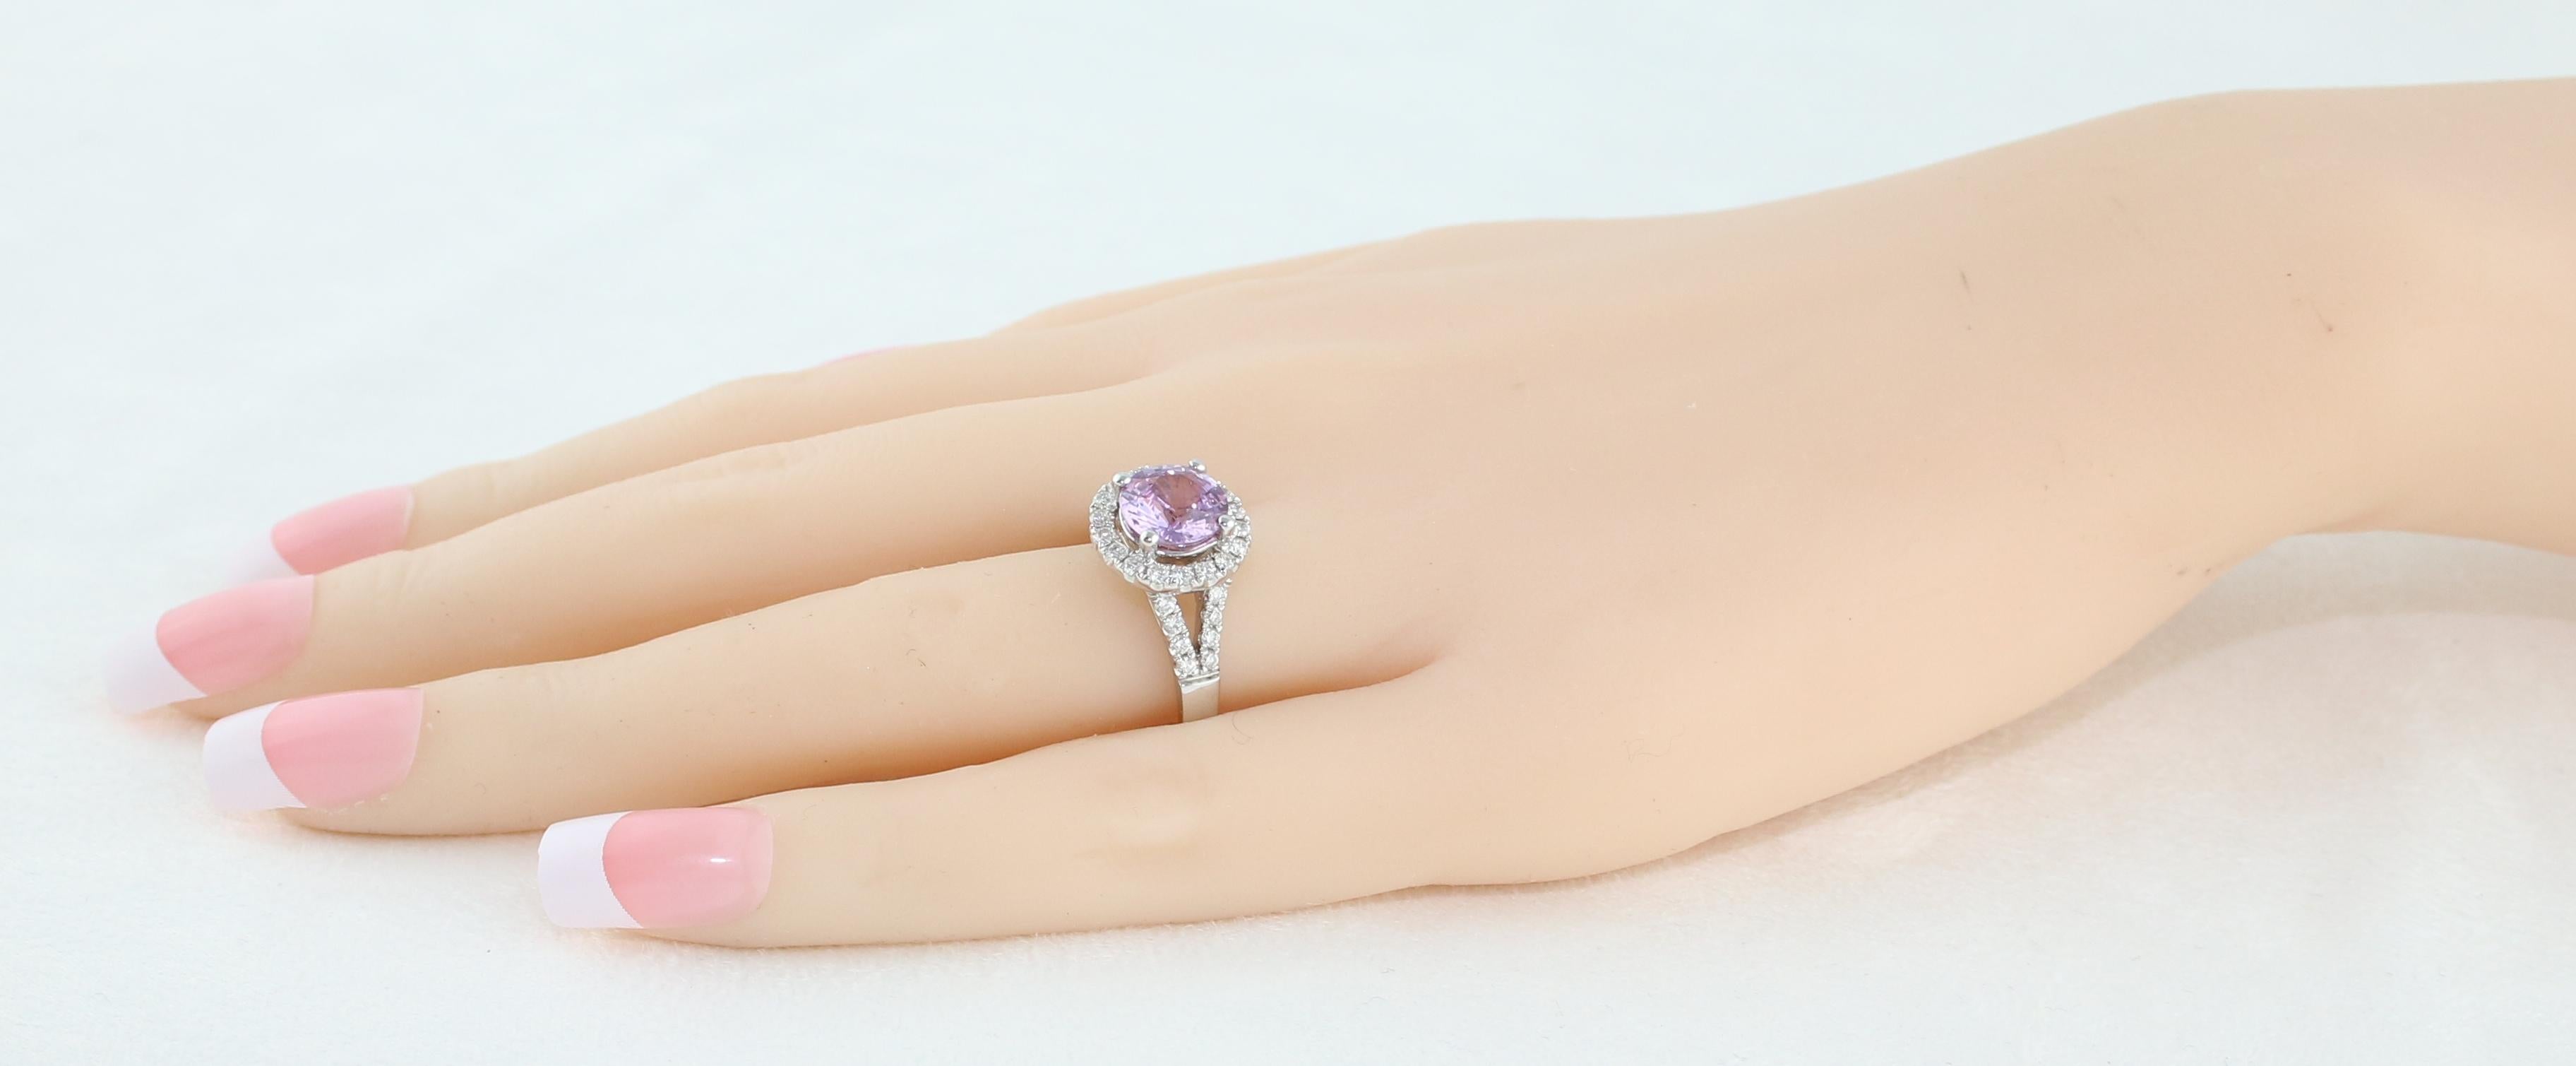 Women's Certified No Heat 2.18 Carat Round Pink Sapphire Diamond Gold Ring For Sale